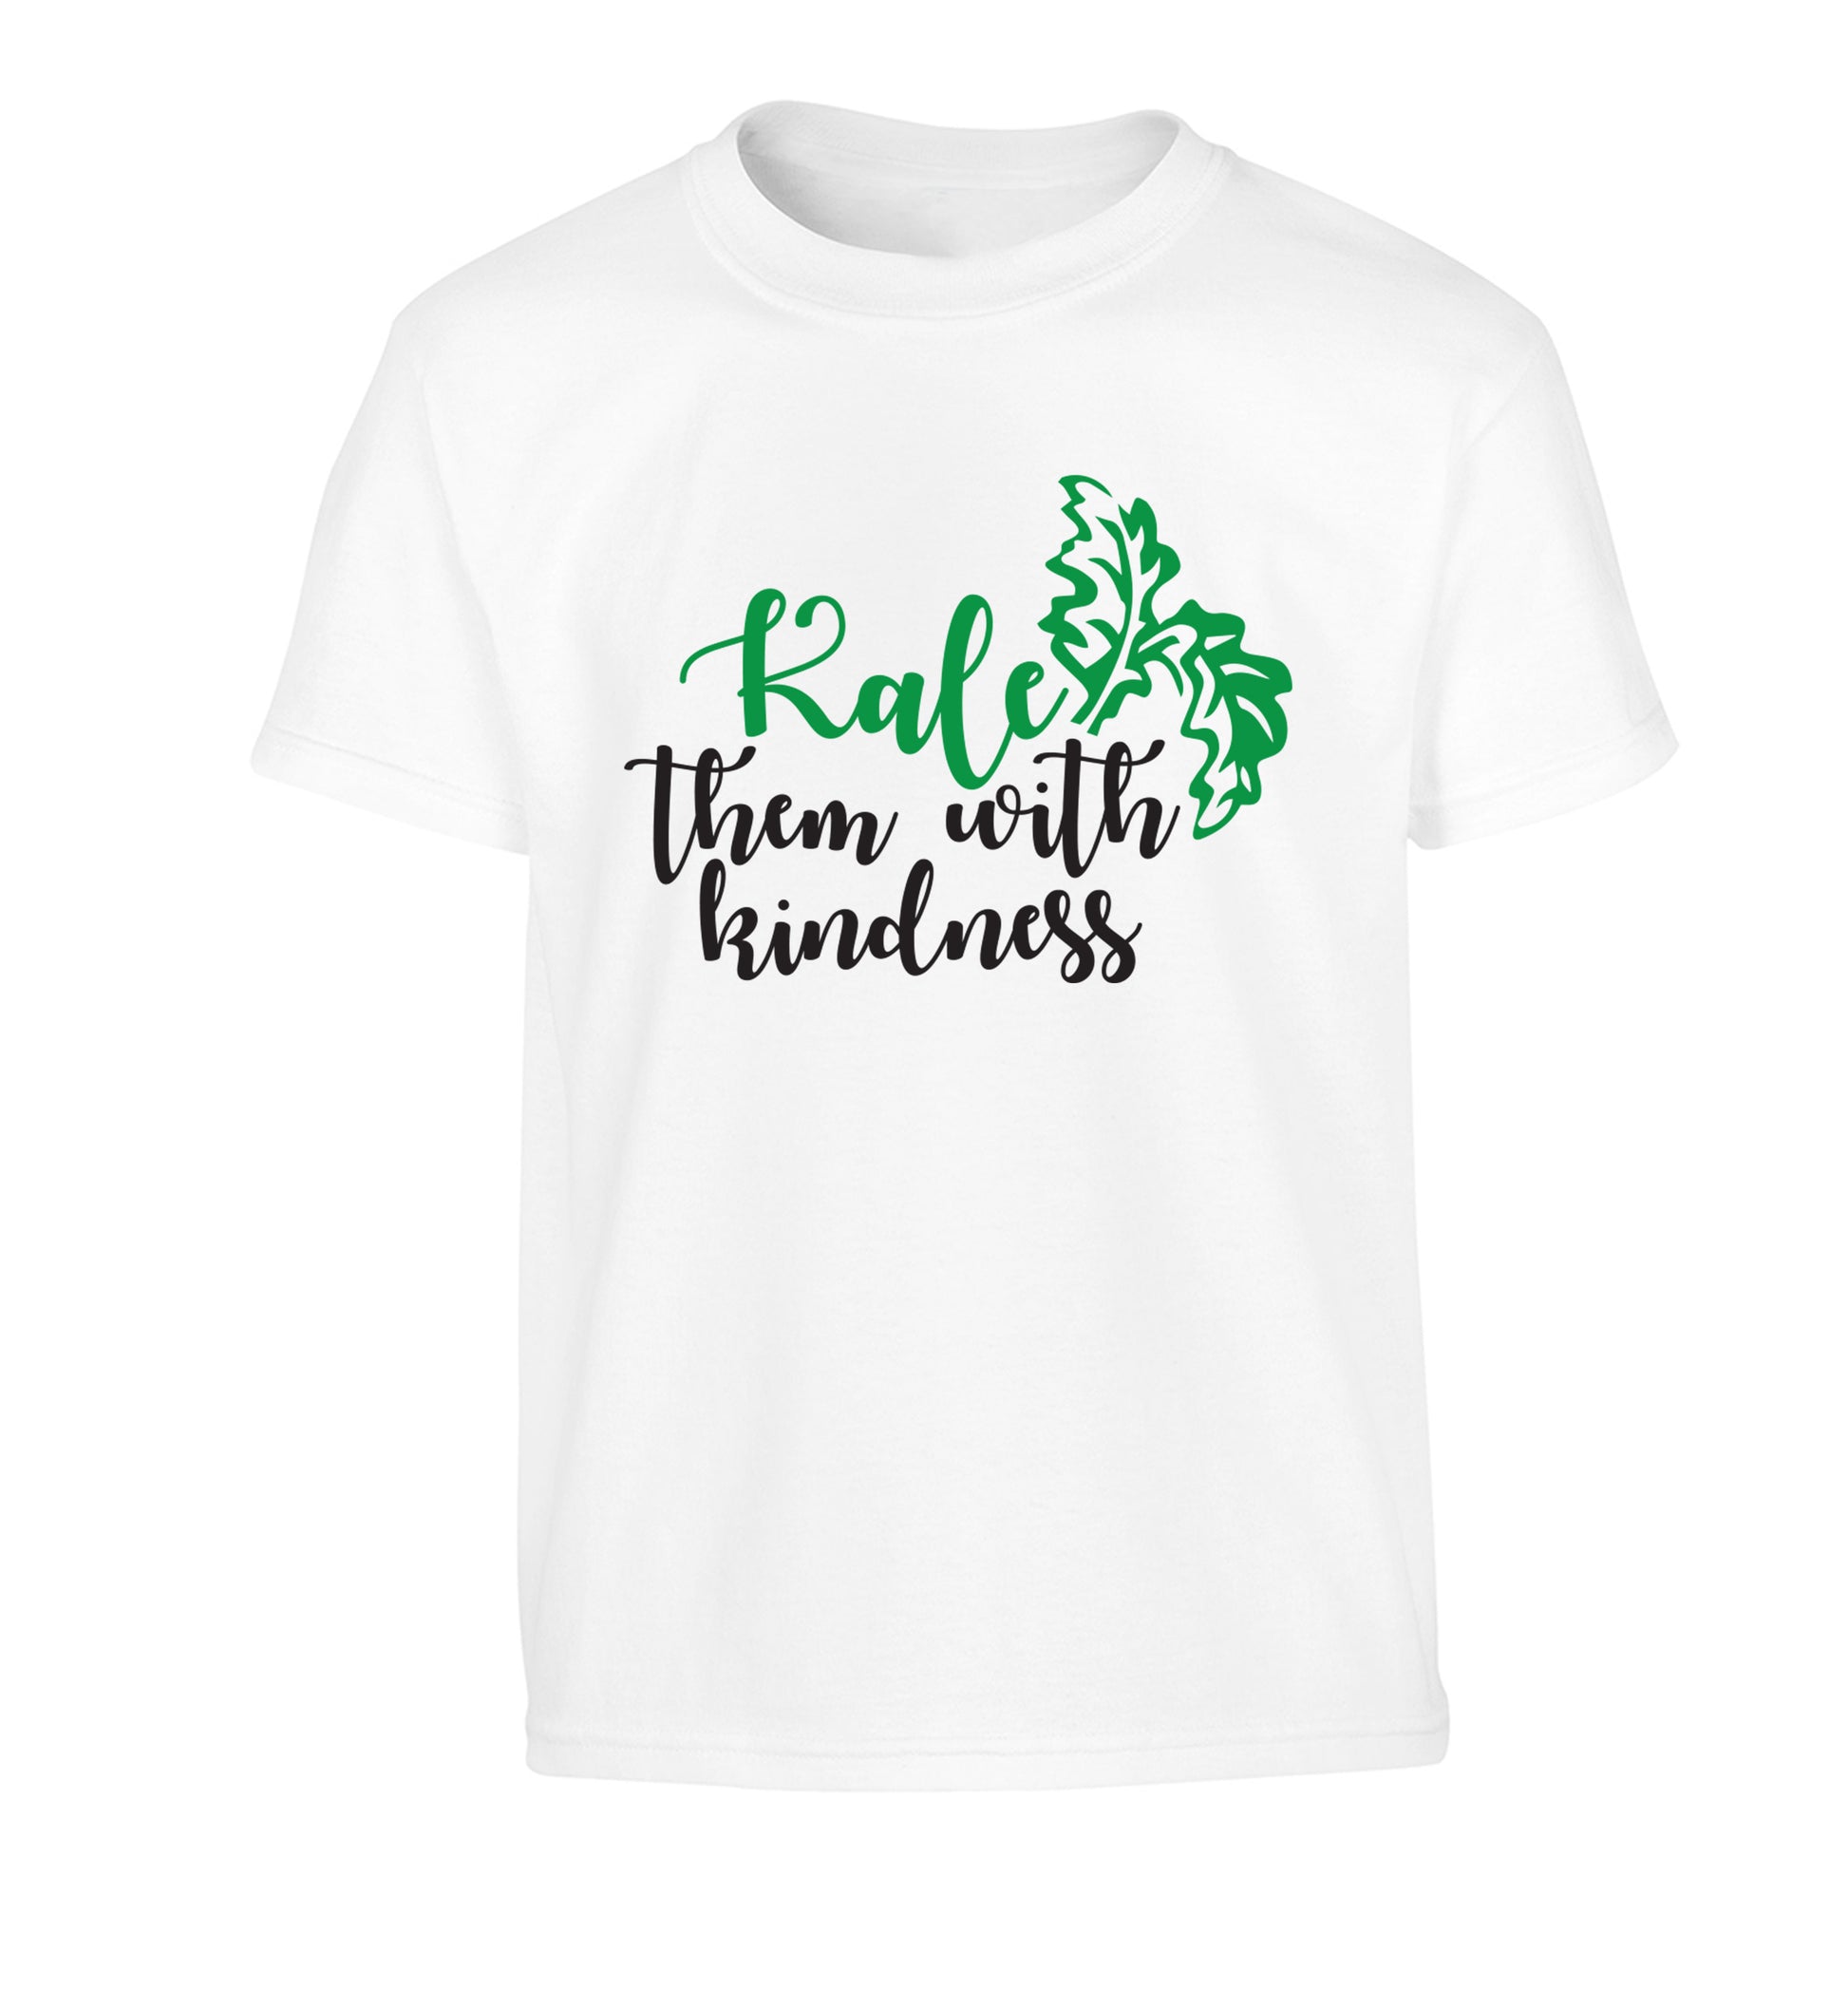 Kale them with kindness Children's white Tshirt 12-14 Years